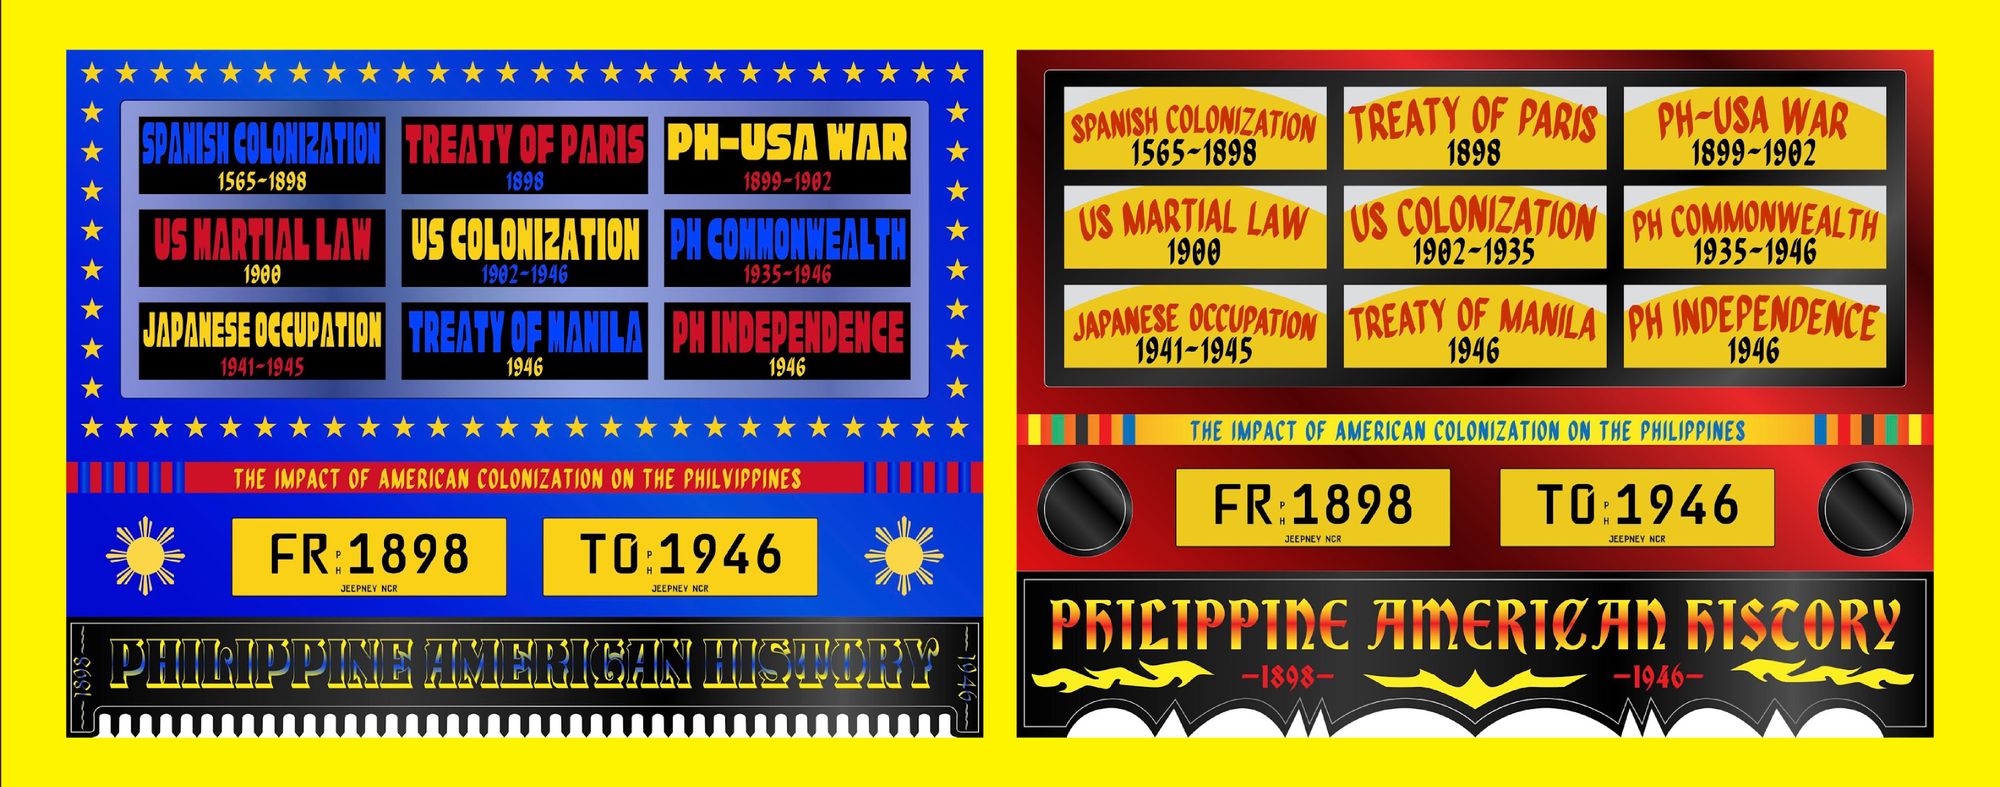 Two posters outlining historical dates during the U.S. colonization of the Philippines from 1898 to 1946. In their colorful design that combines various fonts and decorative elements, the posters pull from local Philippine graphic design languages. 